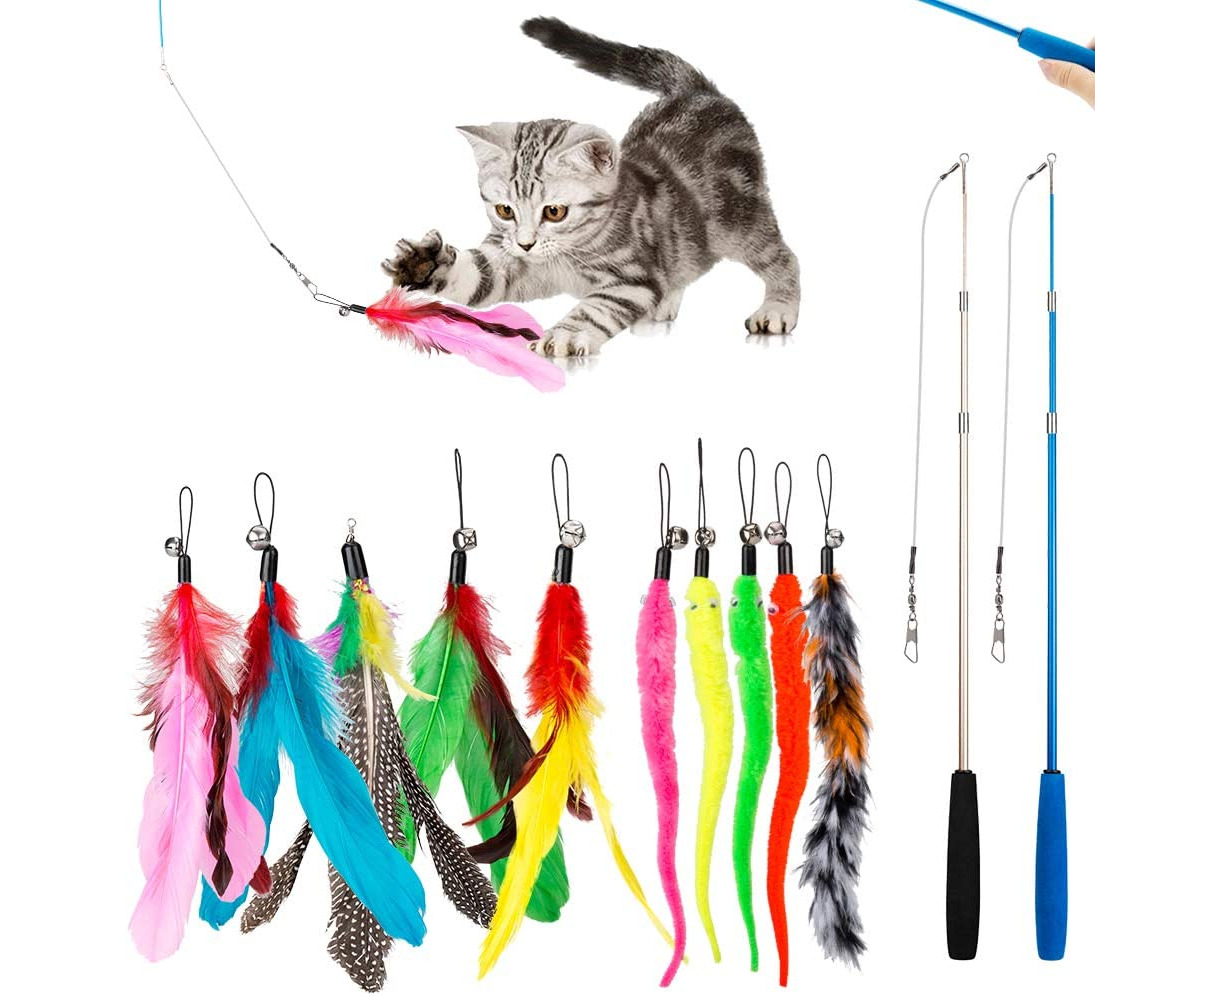 Cat Feather Toy with 2 Feathers,The Cat Will Play Chasing Happily by Itself and Free Your Hands 